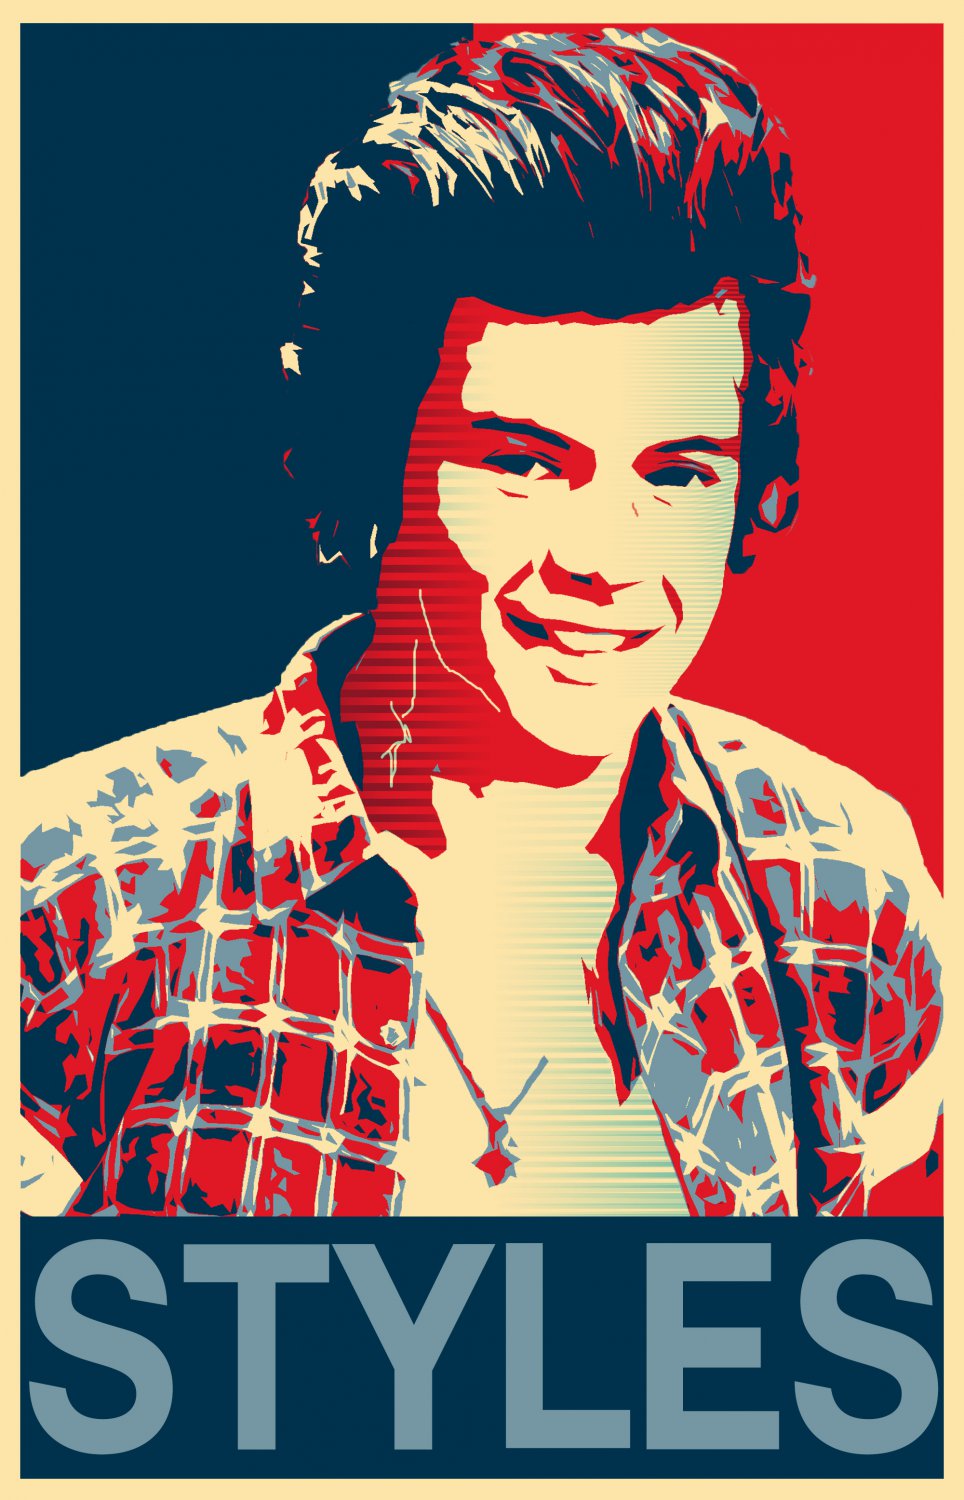 Harry Styles 13"x19" (32cm/49cm) Polyester Fabric Poster